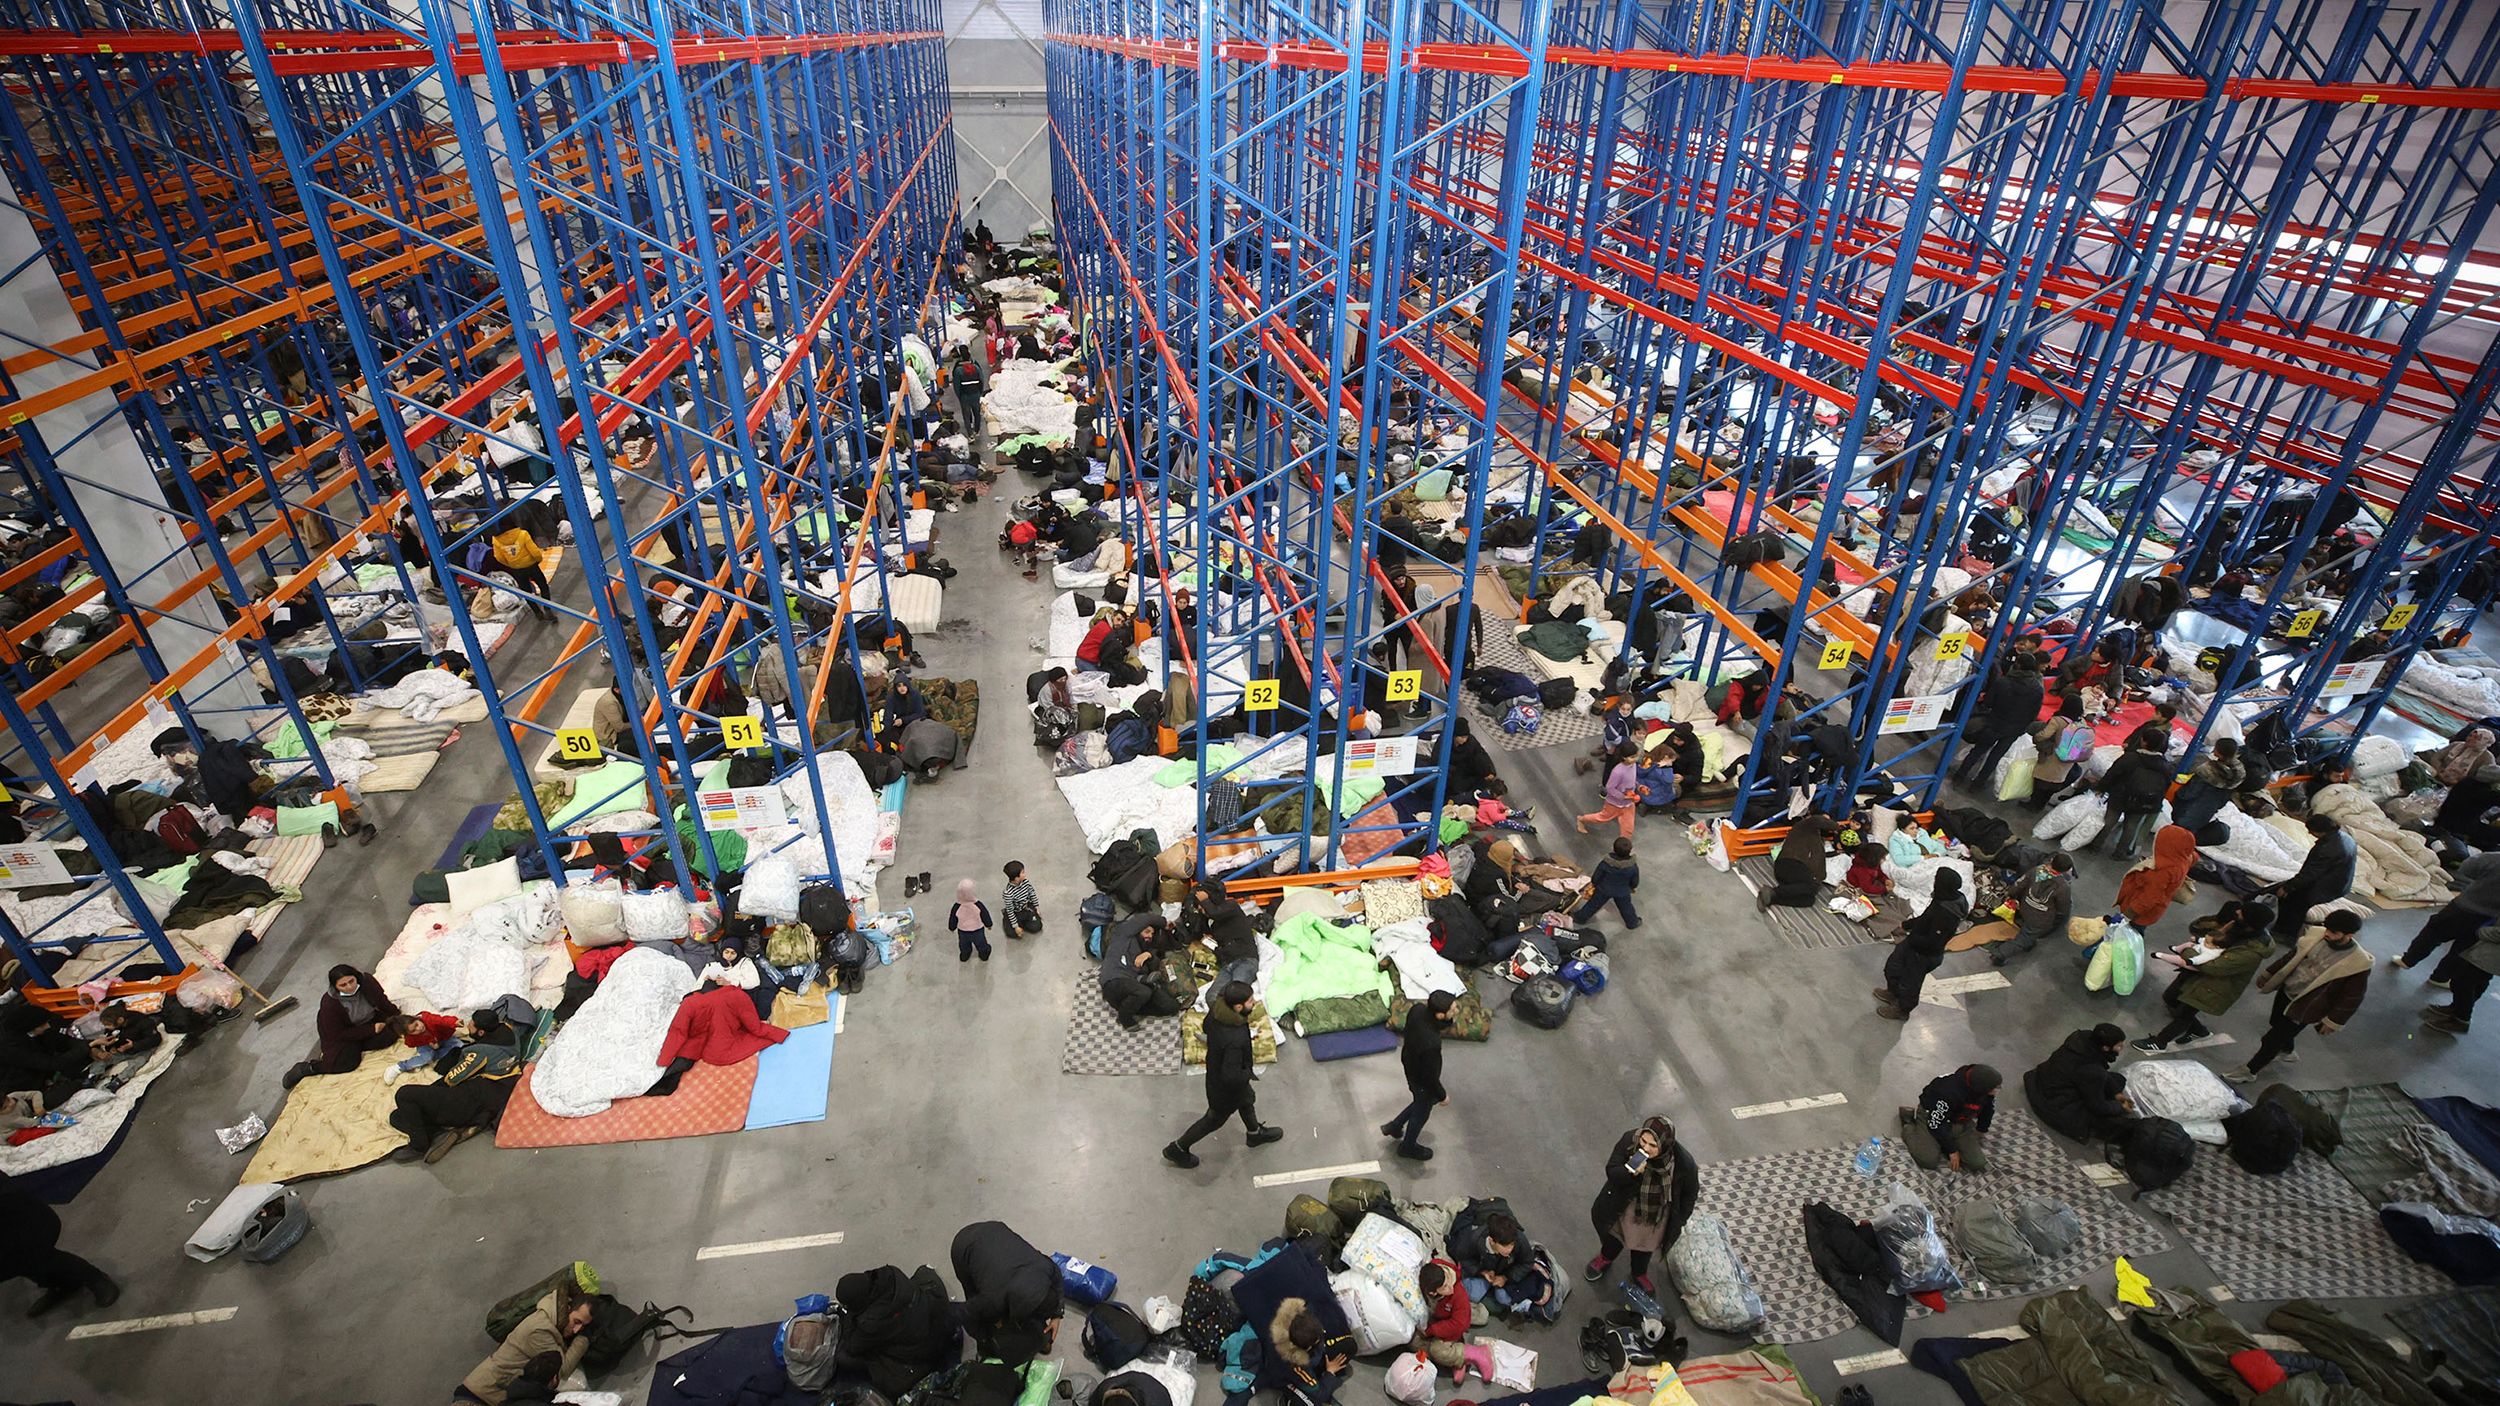 Migrants settle for the night on Thursday, November 18, in a warehouse near the Bruzgi-Kuźnica crossing serving as an ad hoc processing center.